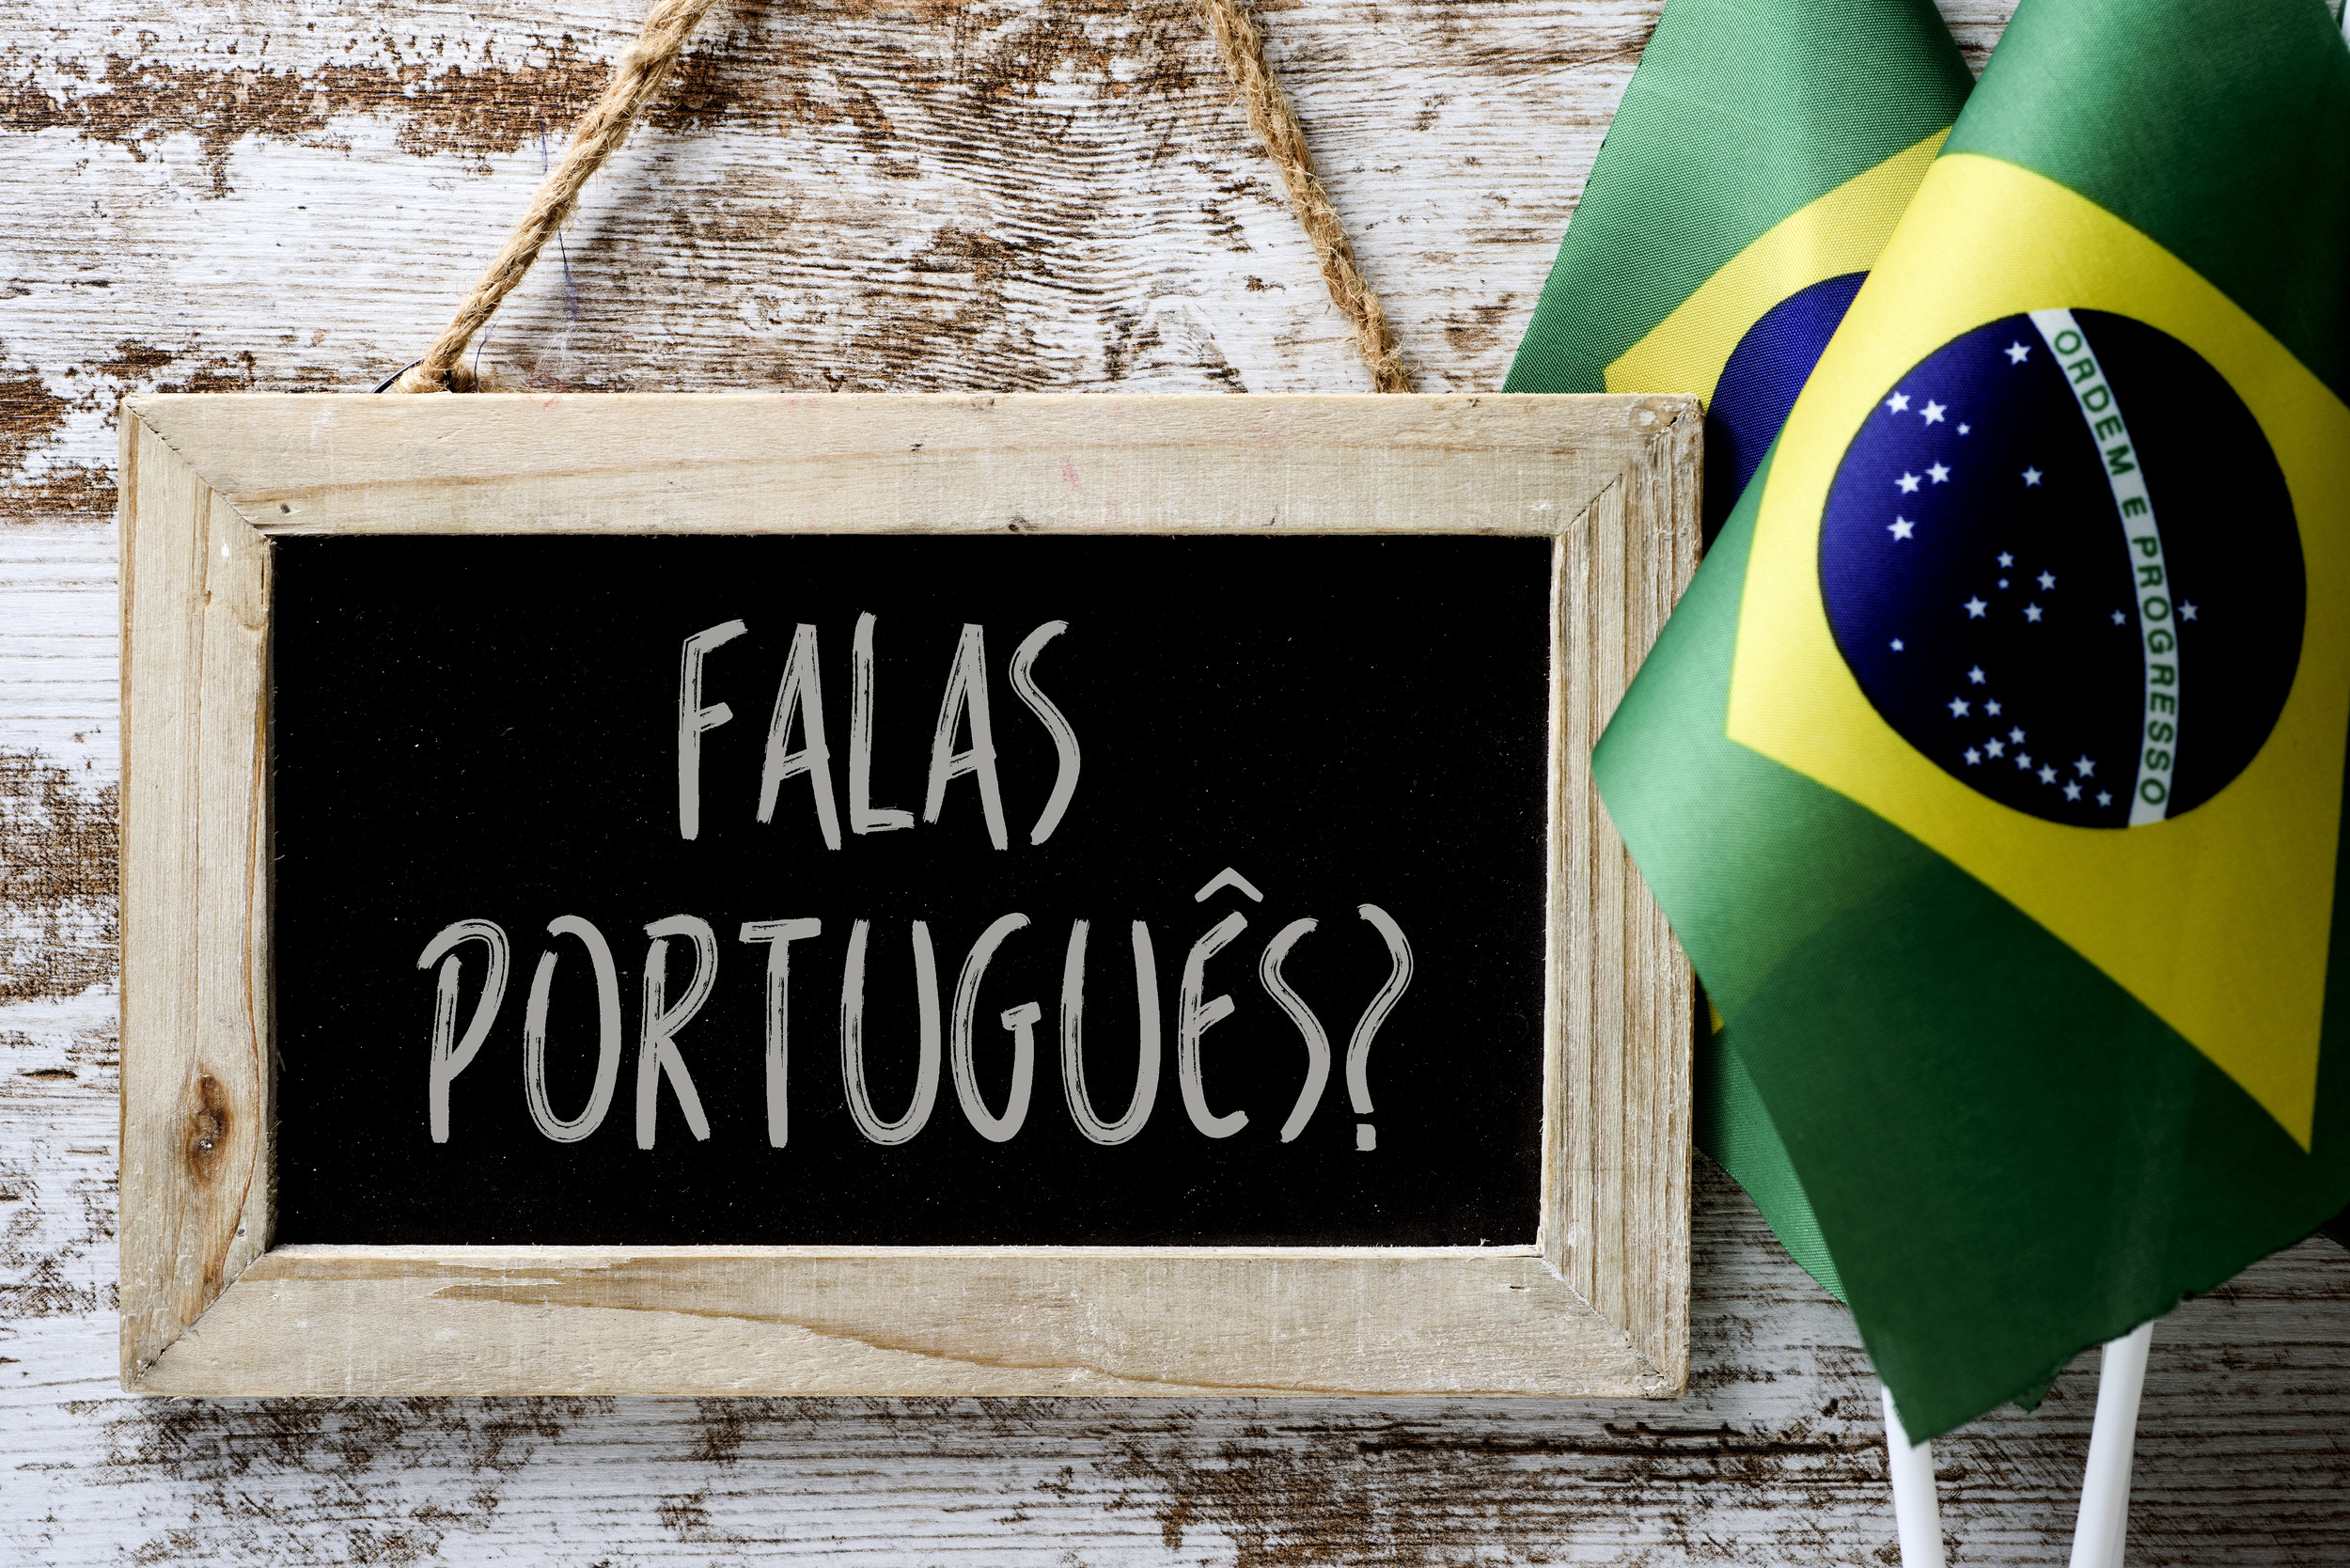 <p>Portuguese is a Romance language, and it’s actually pretty similar to Spanish. Of course, they are two different languages, but if you’ve mastered one as a second language, you shouldn’t have too difficult of a time learning the other.</p><p>You may also like: <a href='https://www.yardbarker.com/lifestyle/articles/22_most_epic_waterfalls_in_the_united_states/s1__38973572'>22 most epic waterfalls in the United States</a></p>